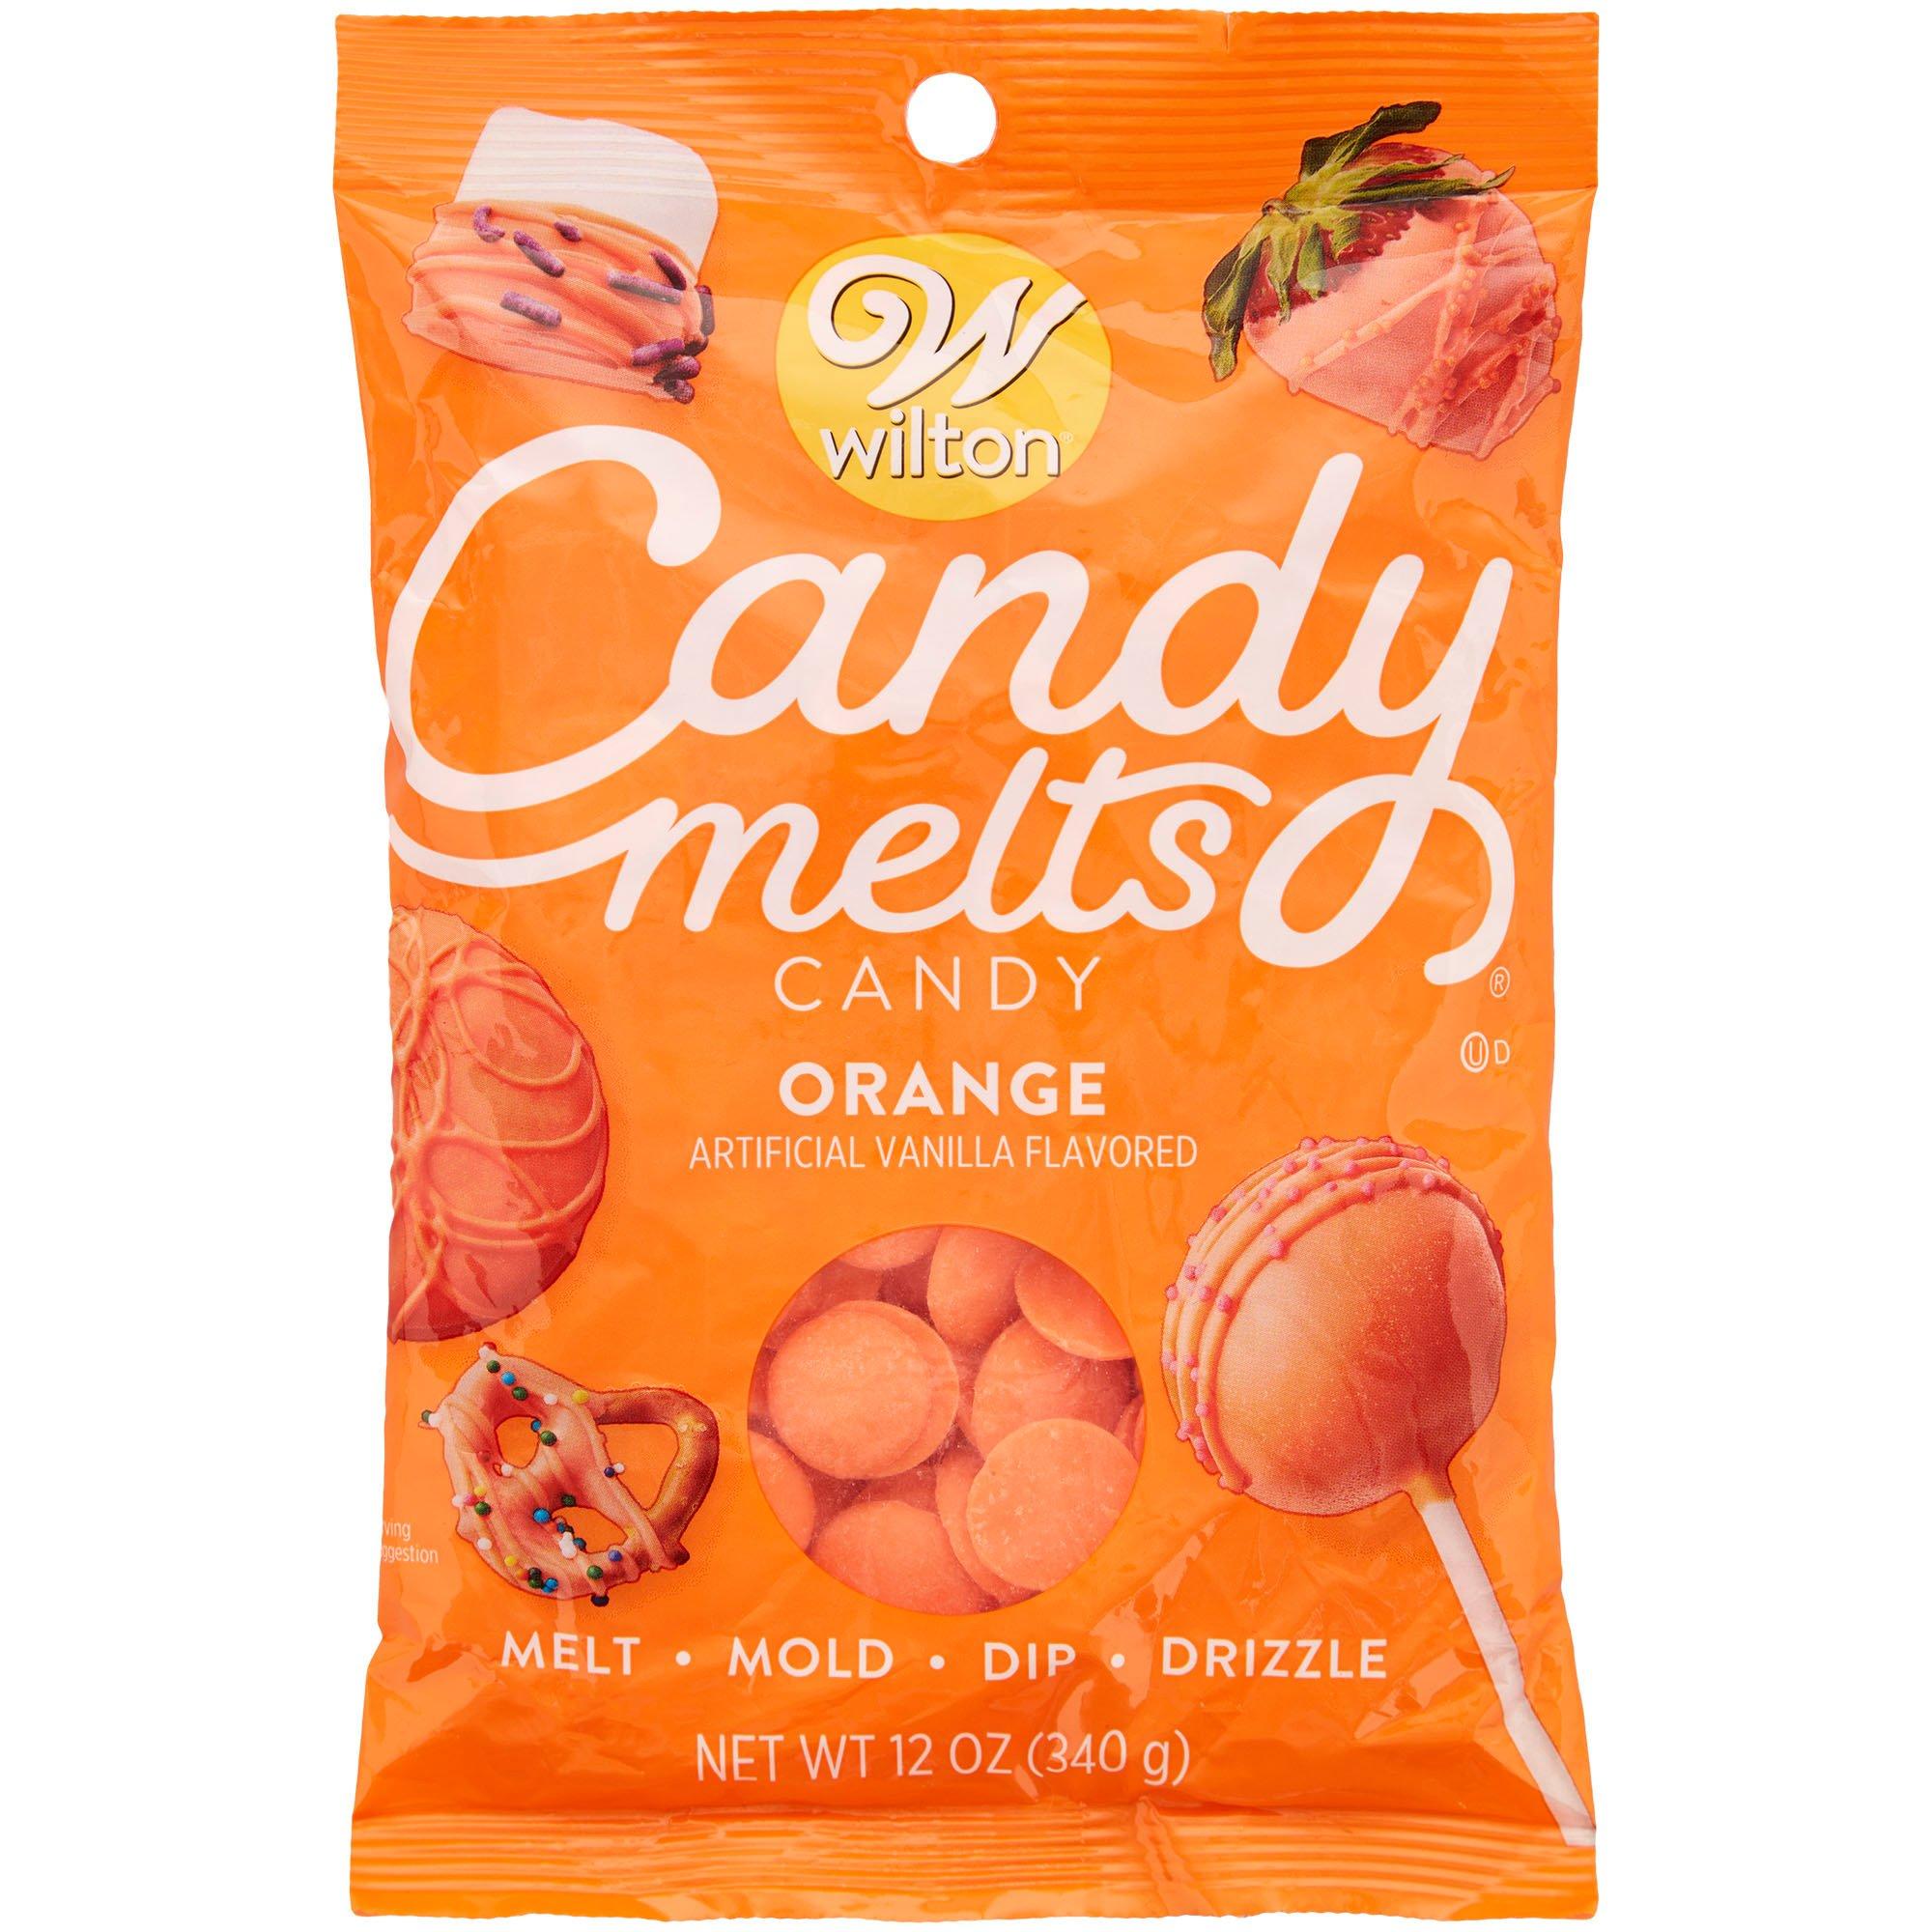 Wilton Bright White Candy Melts, 12 oz. Chocolate & Candy Melts